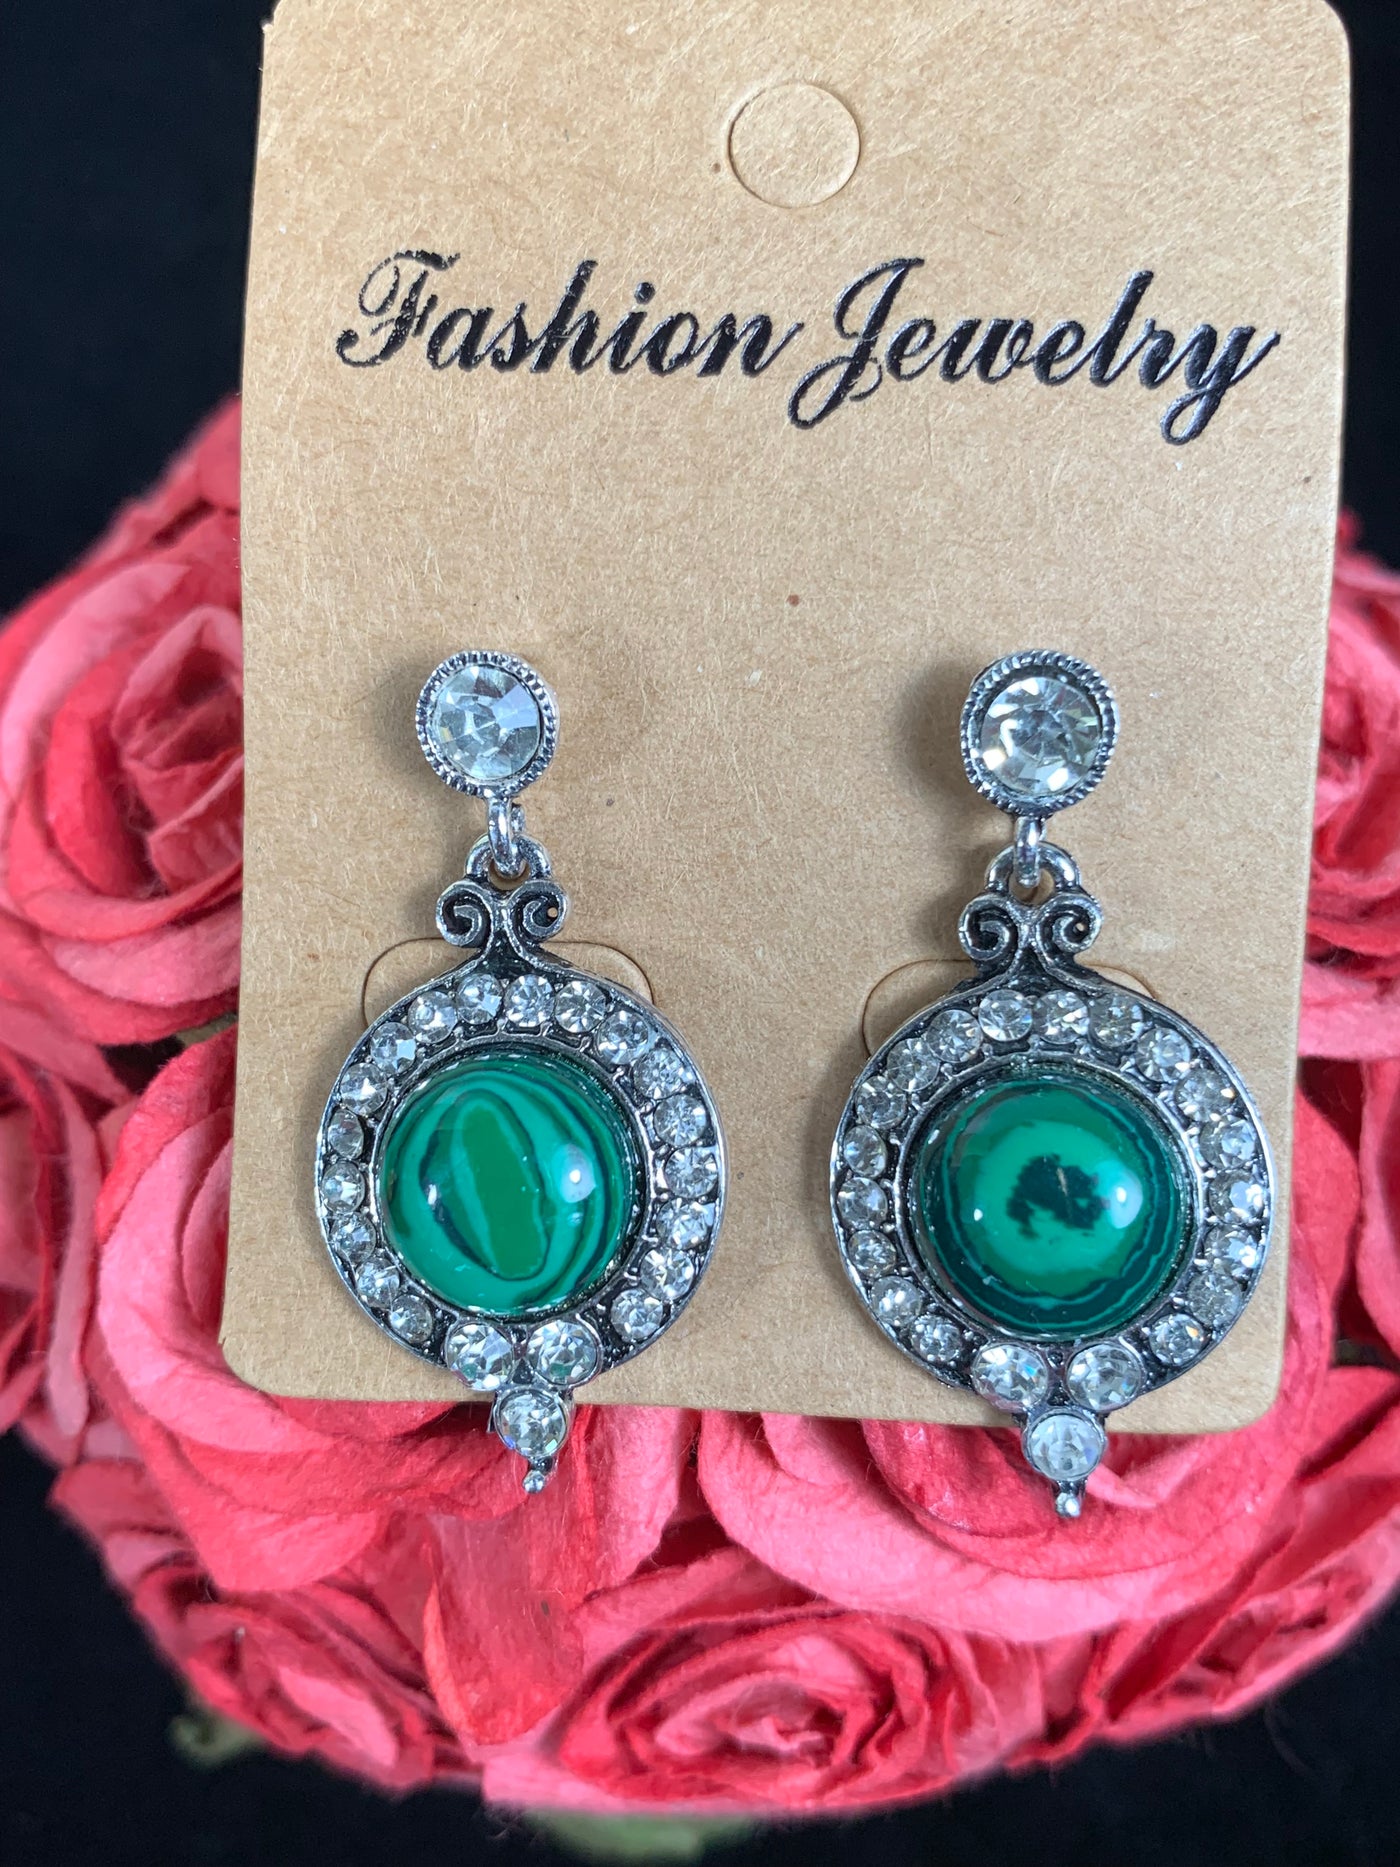 Round Reconstituted Earrings Surrounded by Crystals in Turquoise Malachite Gold Sand Stone & Amethyst